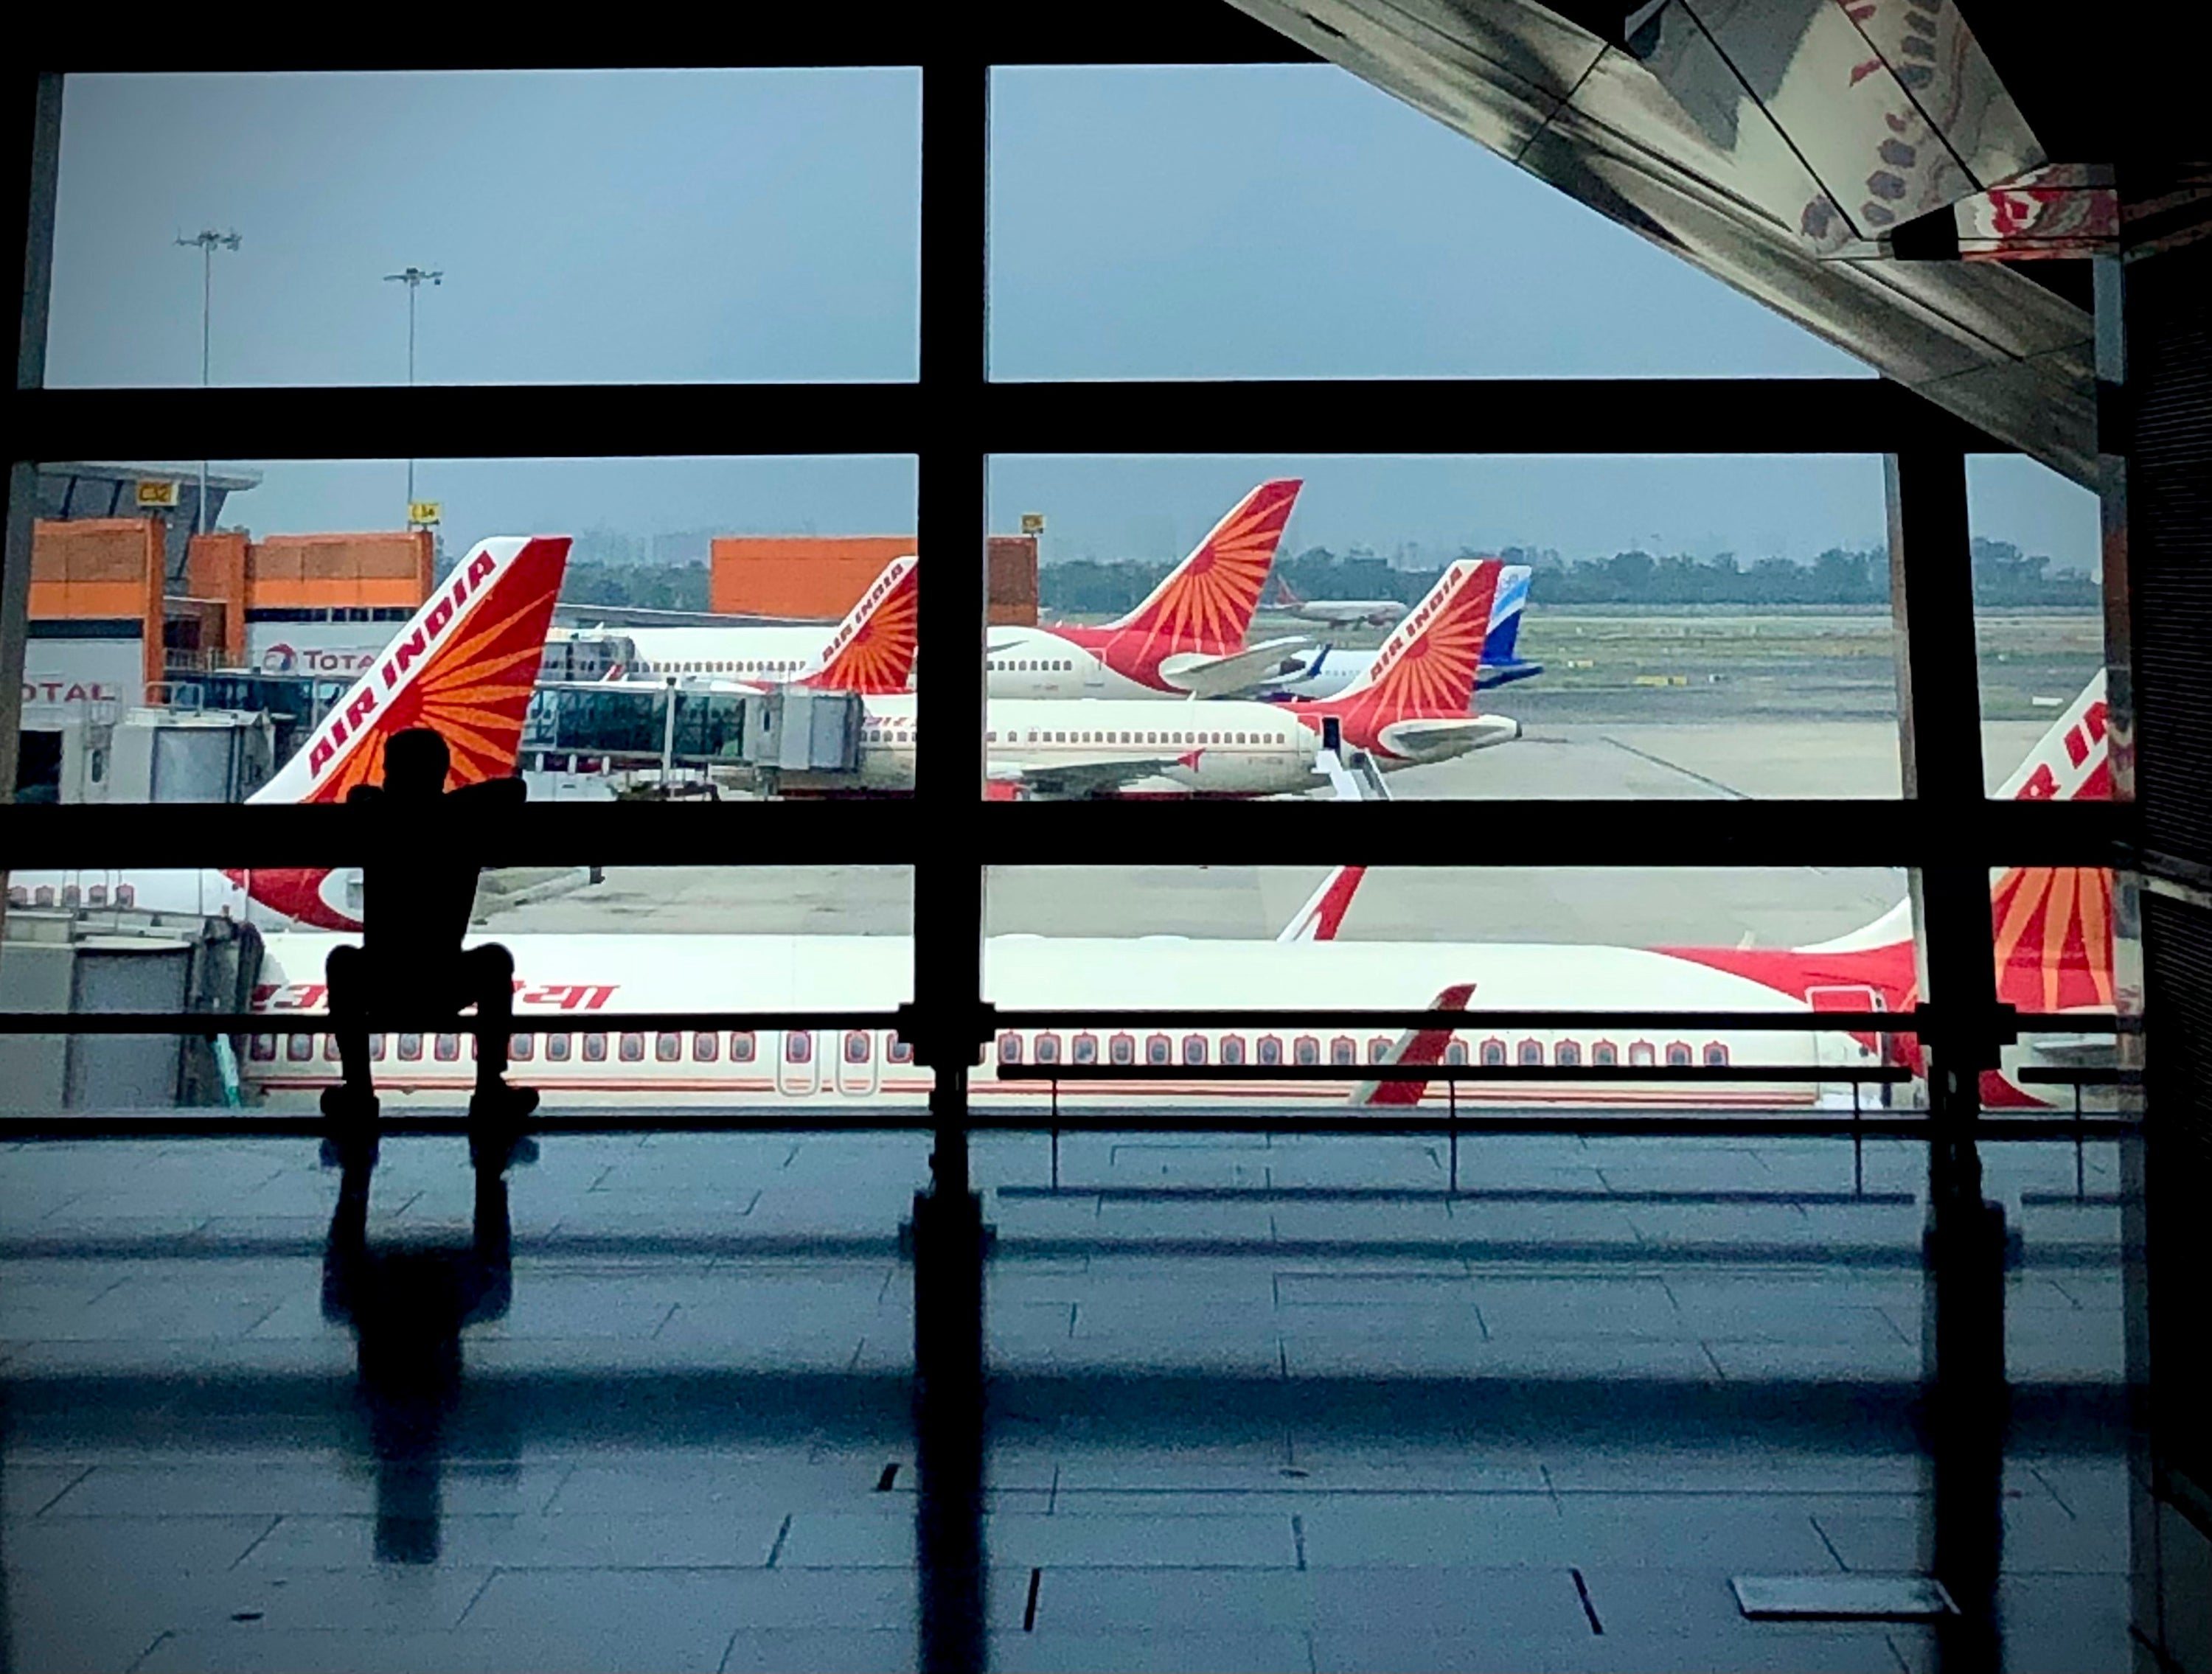 (Representative) An Indian woman alleged that her 80-year-old differently abled mother was strip searched at an airport after her hip implants triggered metal detectors